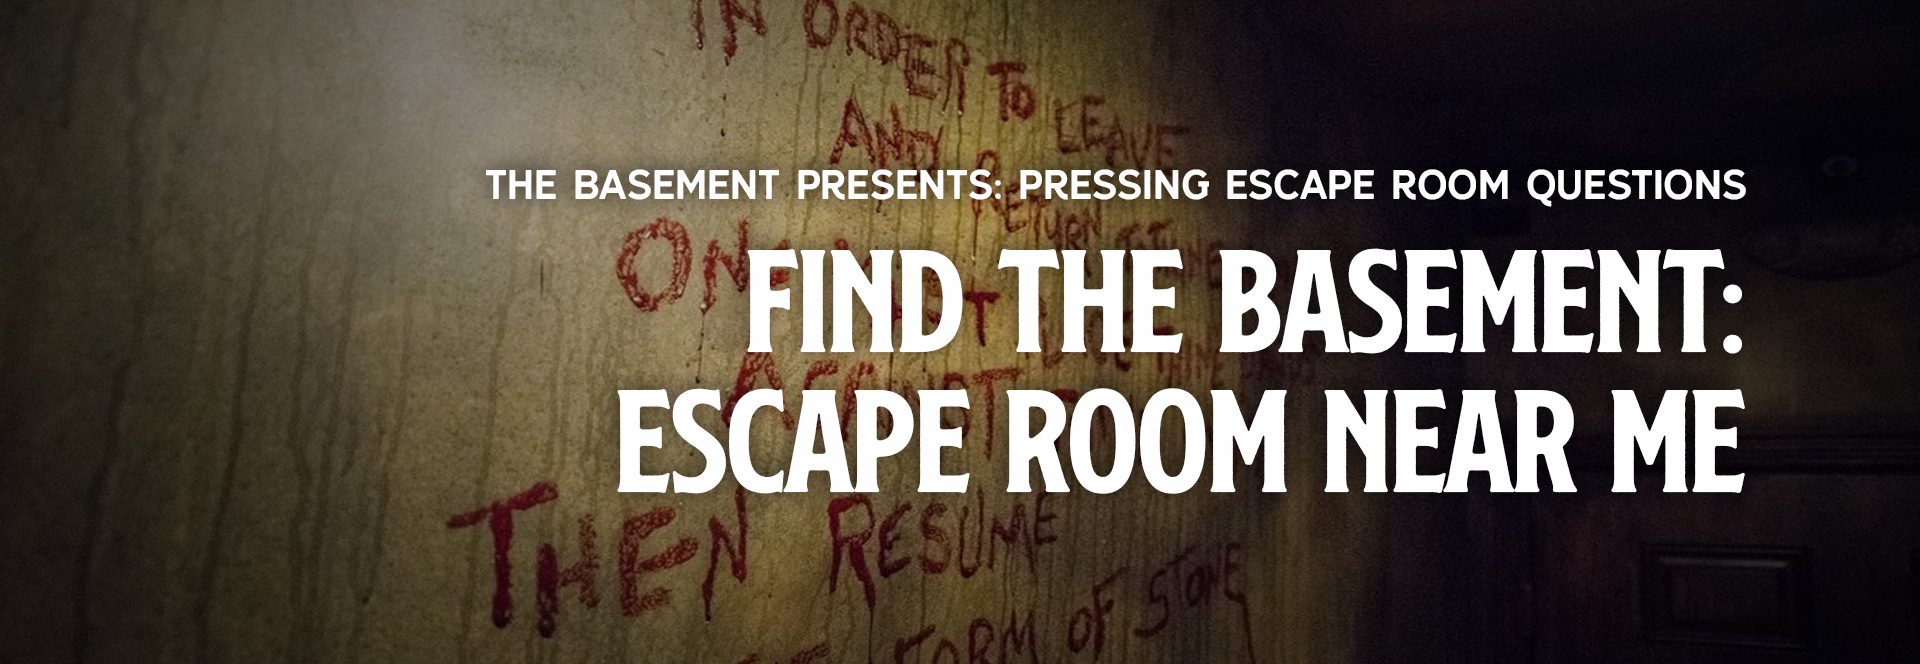 Find The Basement: Escape Room Near Me